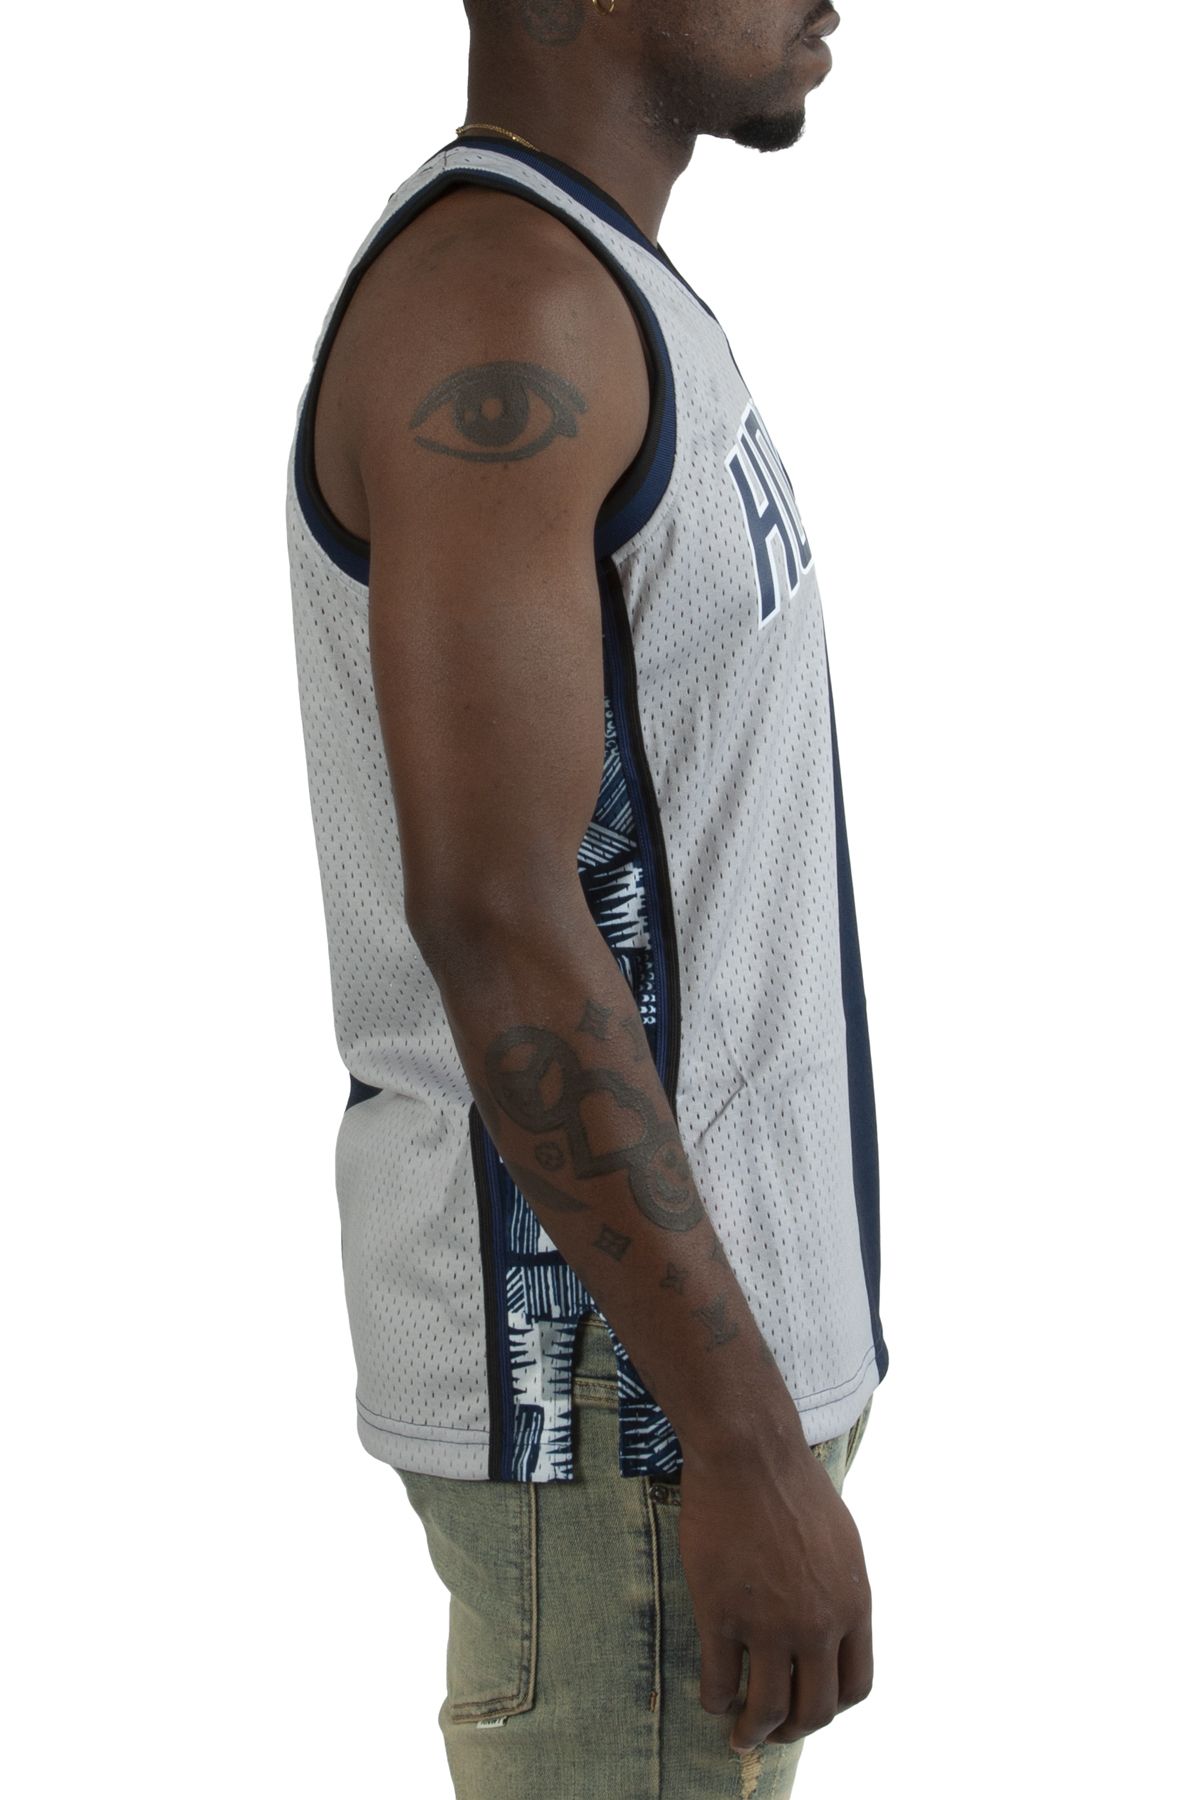 MITCHELL AND NESS GEORGETOWN 1995 ALLEN IVERSON JERSEY  SMJY4845-GTW95AIVGYNY - Shiekh